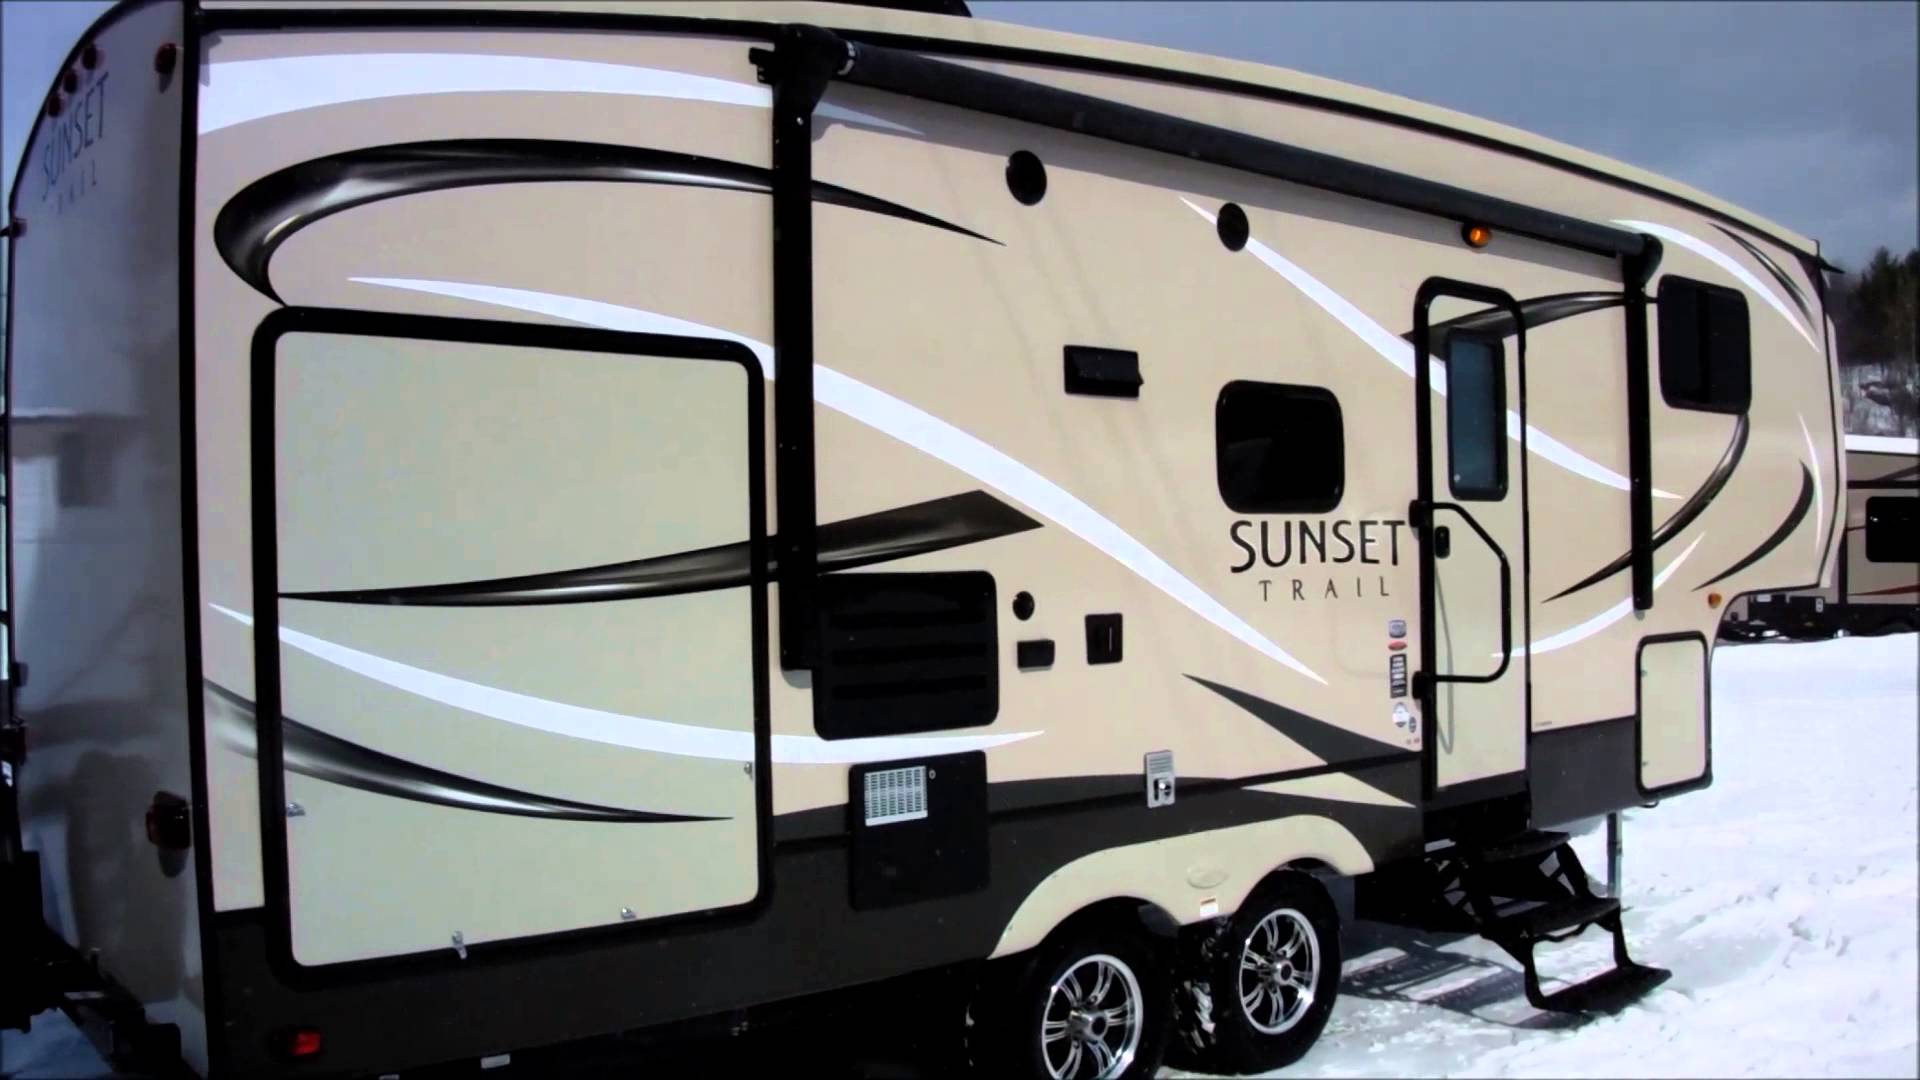 Fifth Wheel, Sunset Trail, 22RB, 2016 !!!! - YouTube